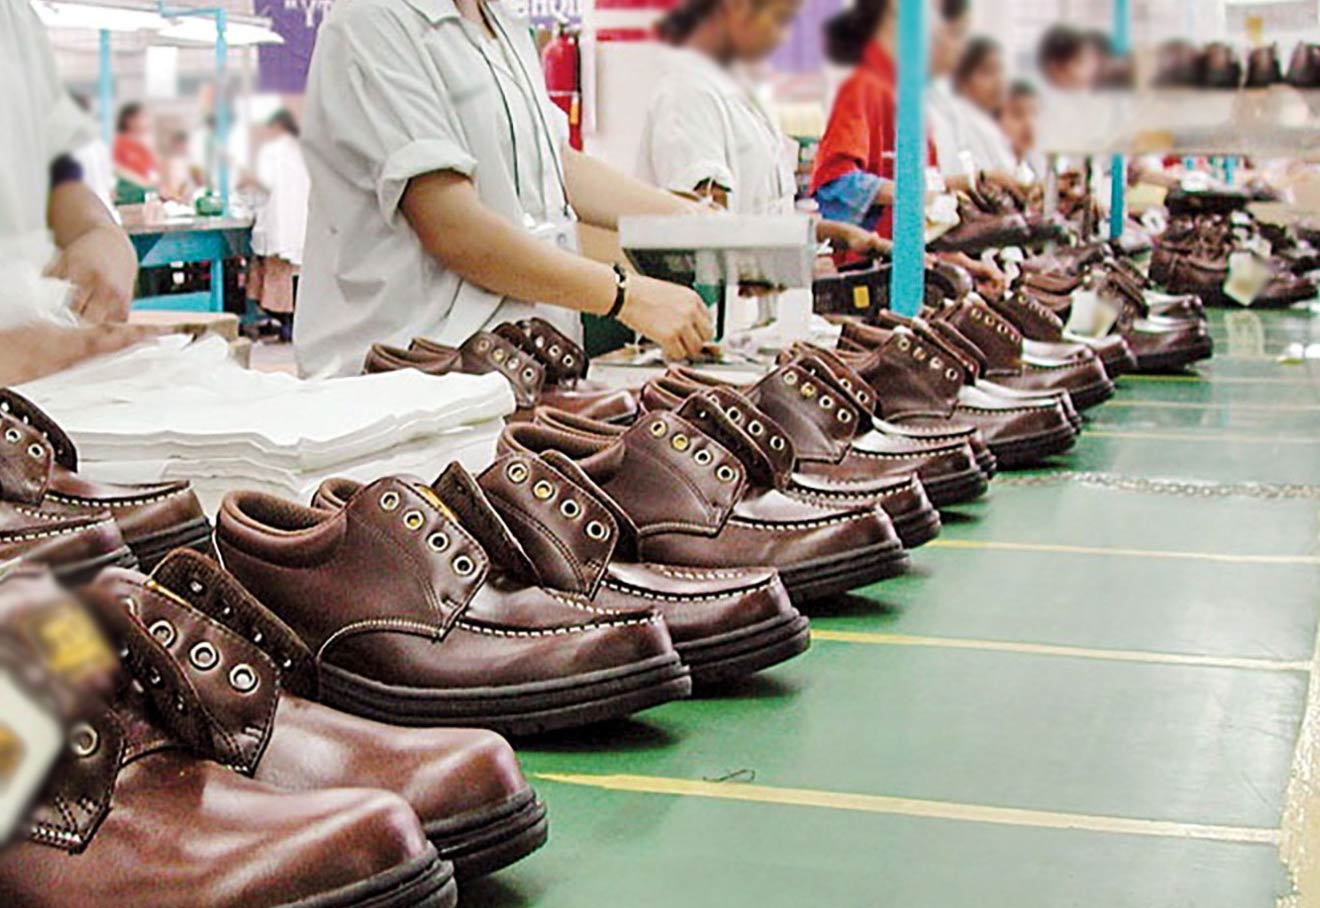 Indian Footwear Industry Likely To Witness 7-8% Growth In FY24: ICRA